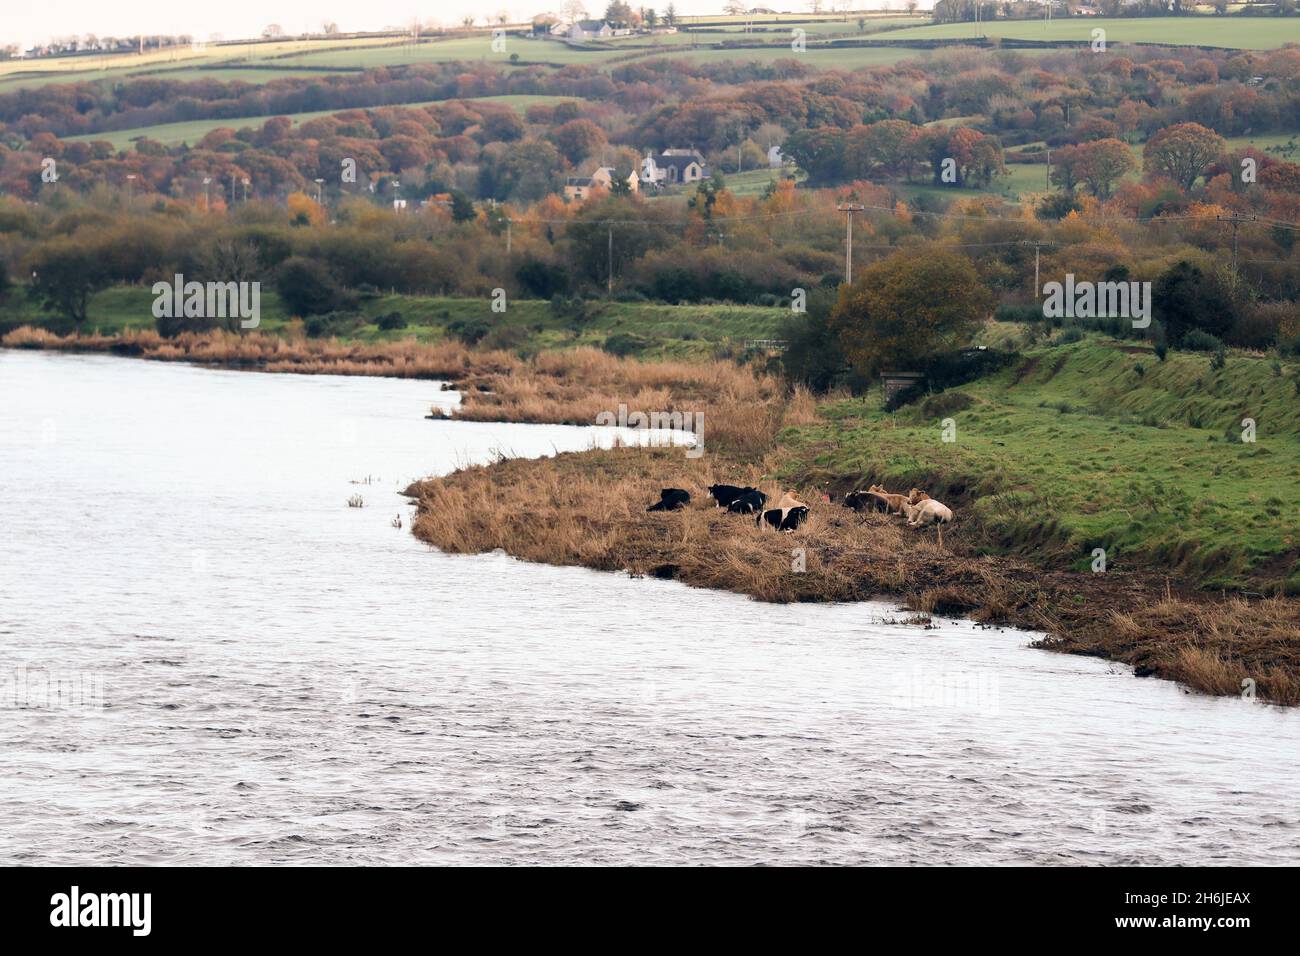 The Irish Border between Strabane(NI) and Lifford(RoI) which crosses the River Foyle. Stock Photo